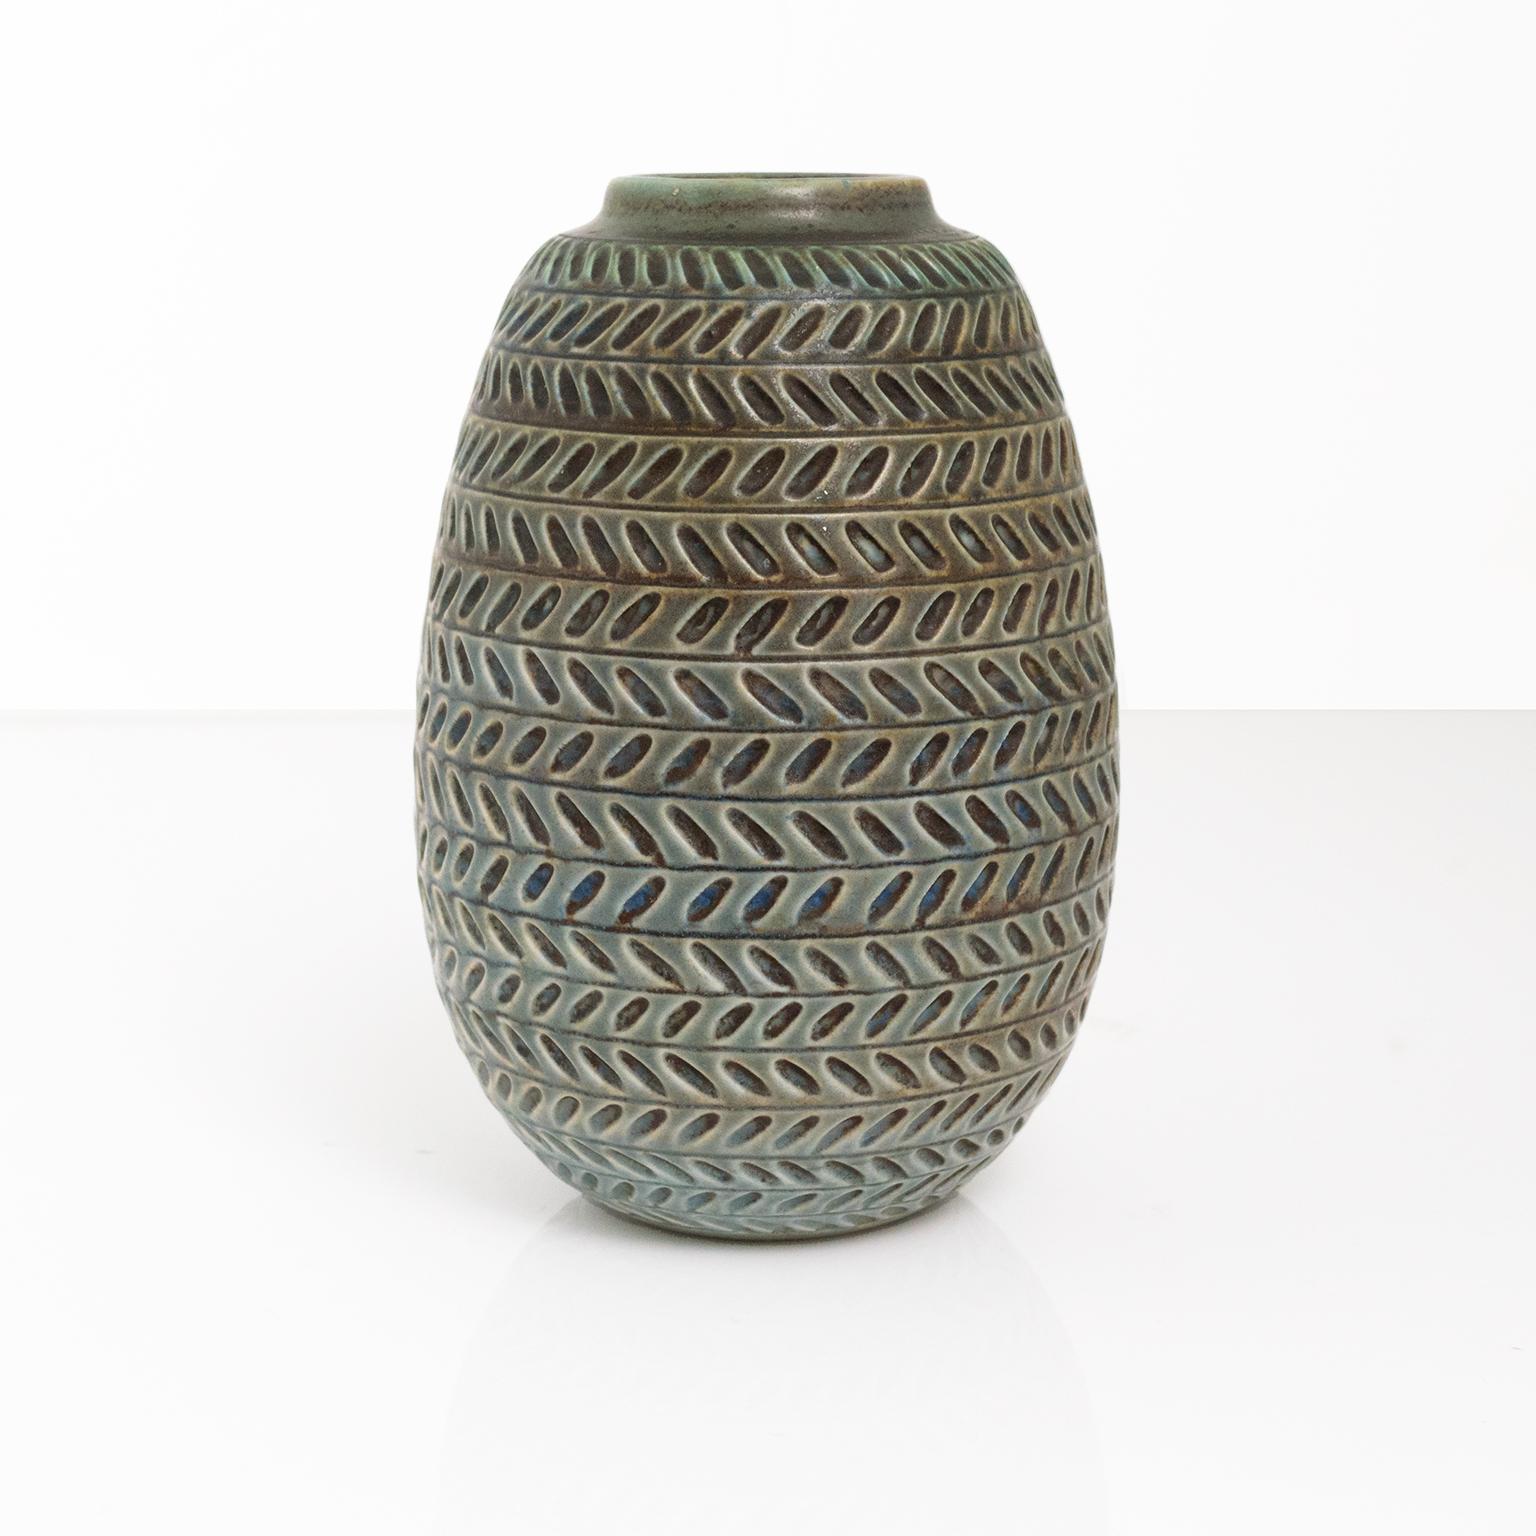 Gertrud Lonegren textured vase with bands of horizontal patterns in neutral blue and green. This studio piece was created at Rorstrand between 1937-42.
Measures: Height: 7